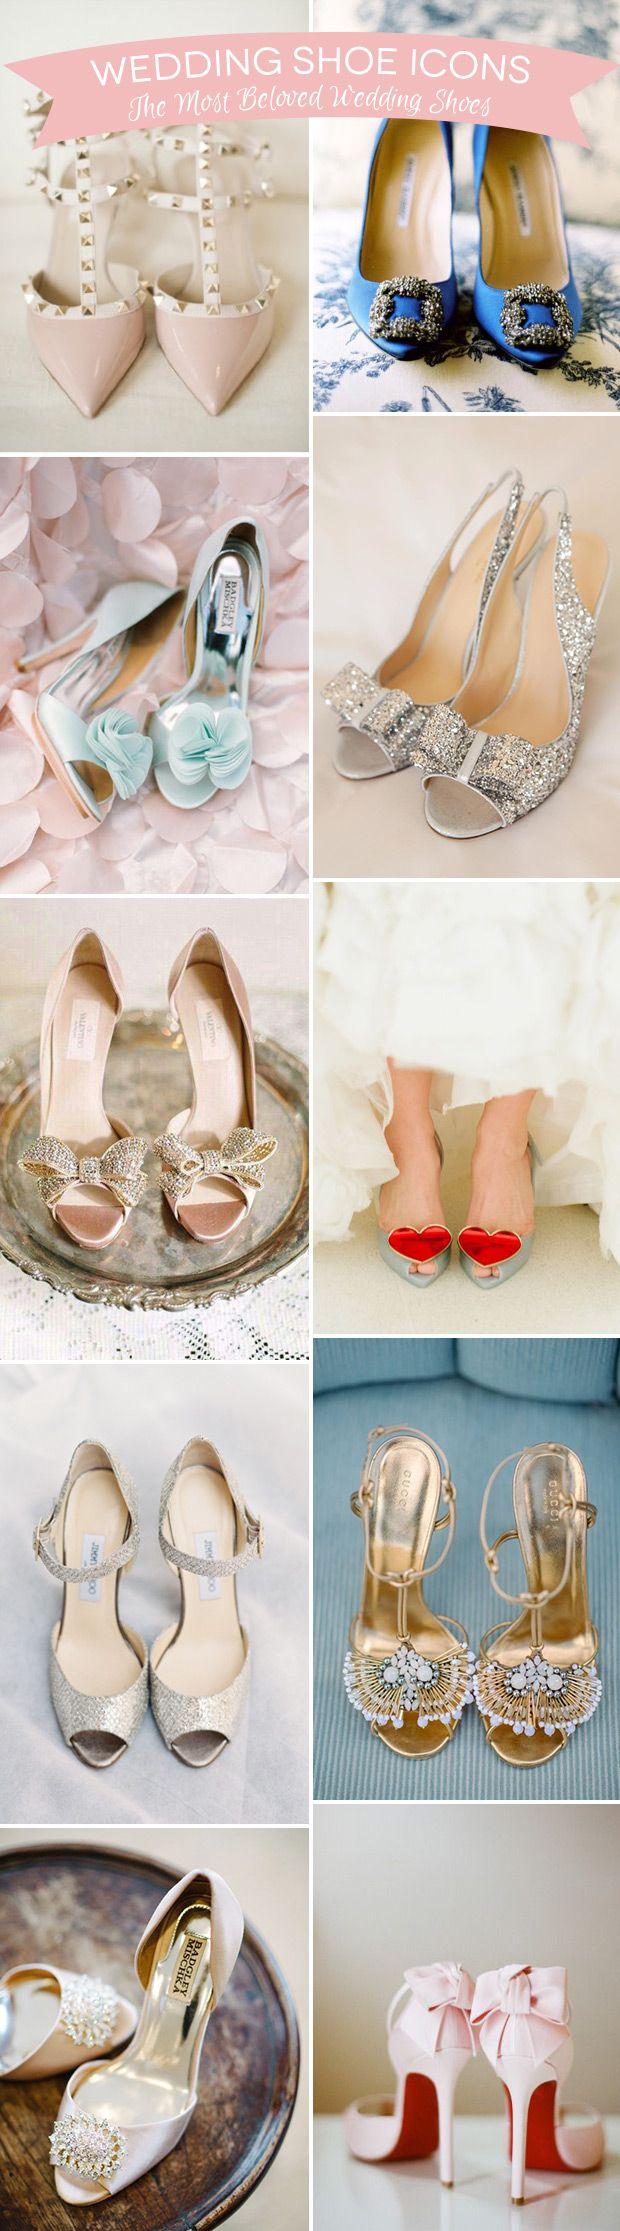 Wedding - Shoe Icons - The 11 Most Popular Wedding Shoes Ever